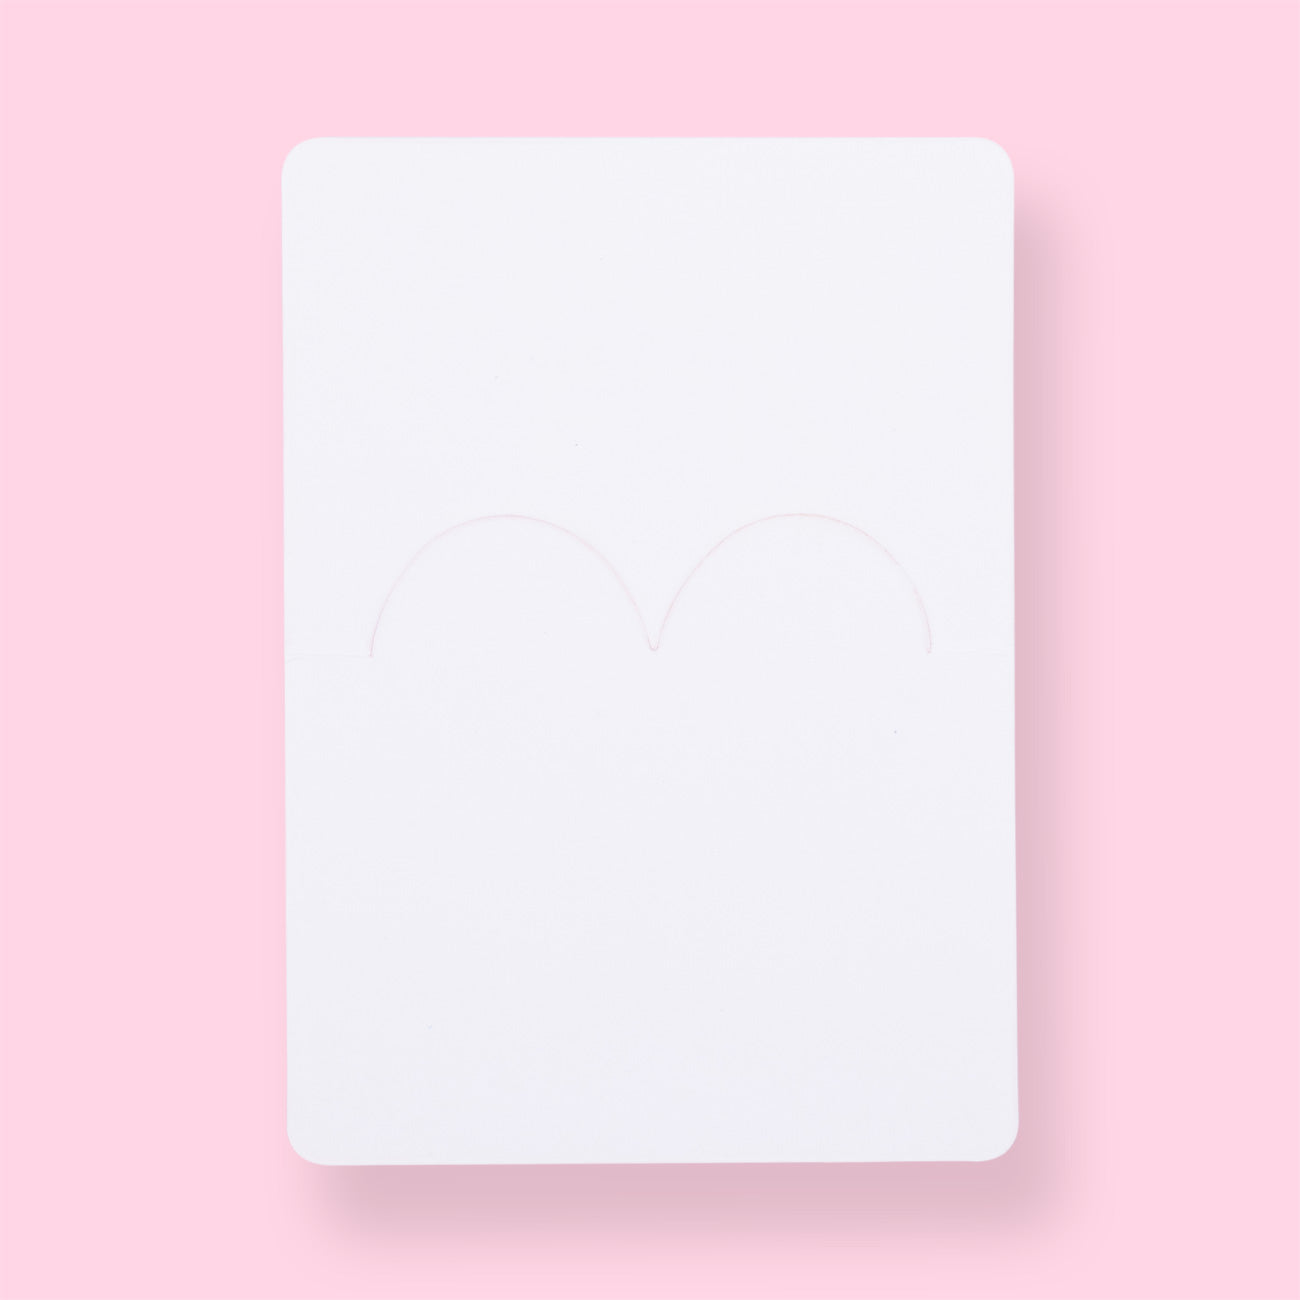 Heart Greeting Card With Envelope - Best Wishes